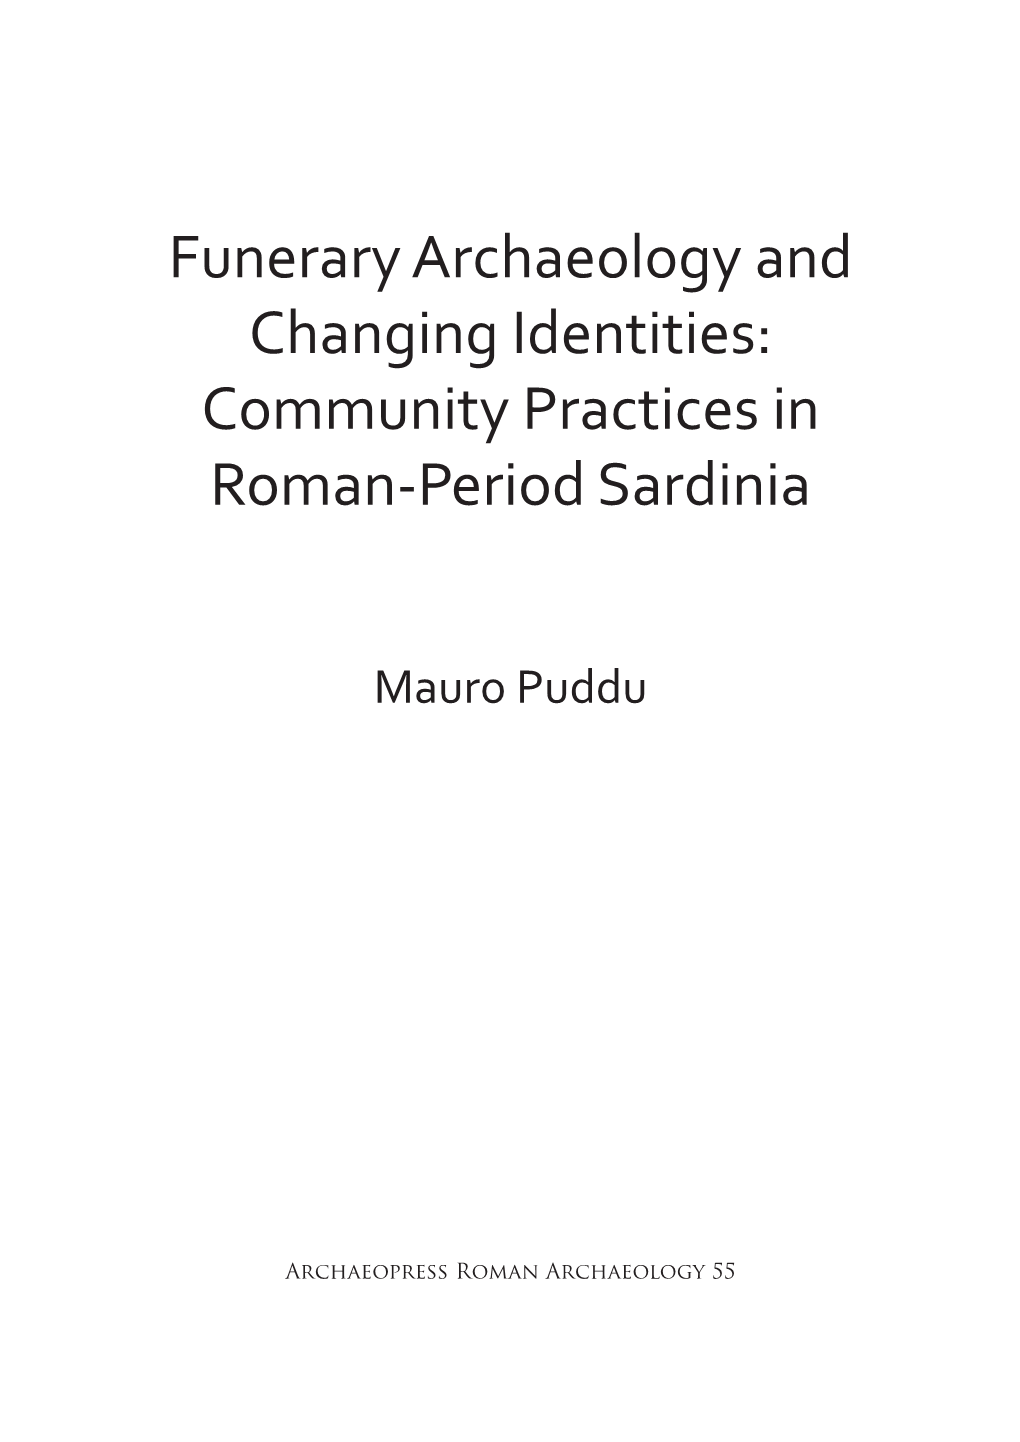 Funerary Archaeology and Changing Identities: Community Practices in Roman-Period Sardinia